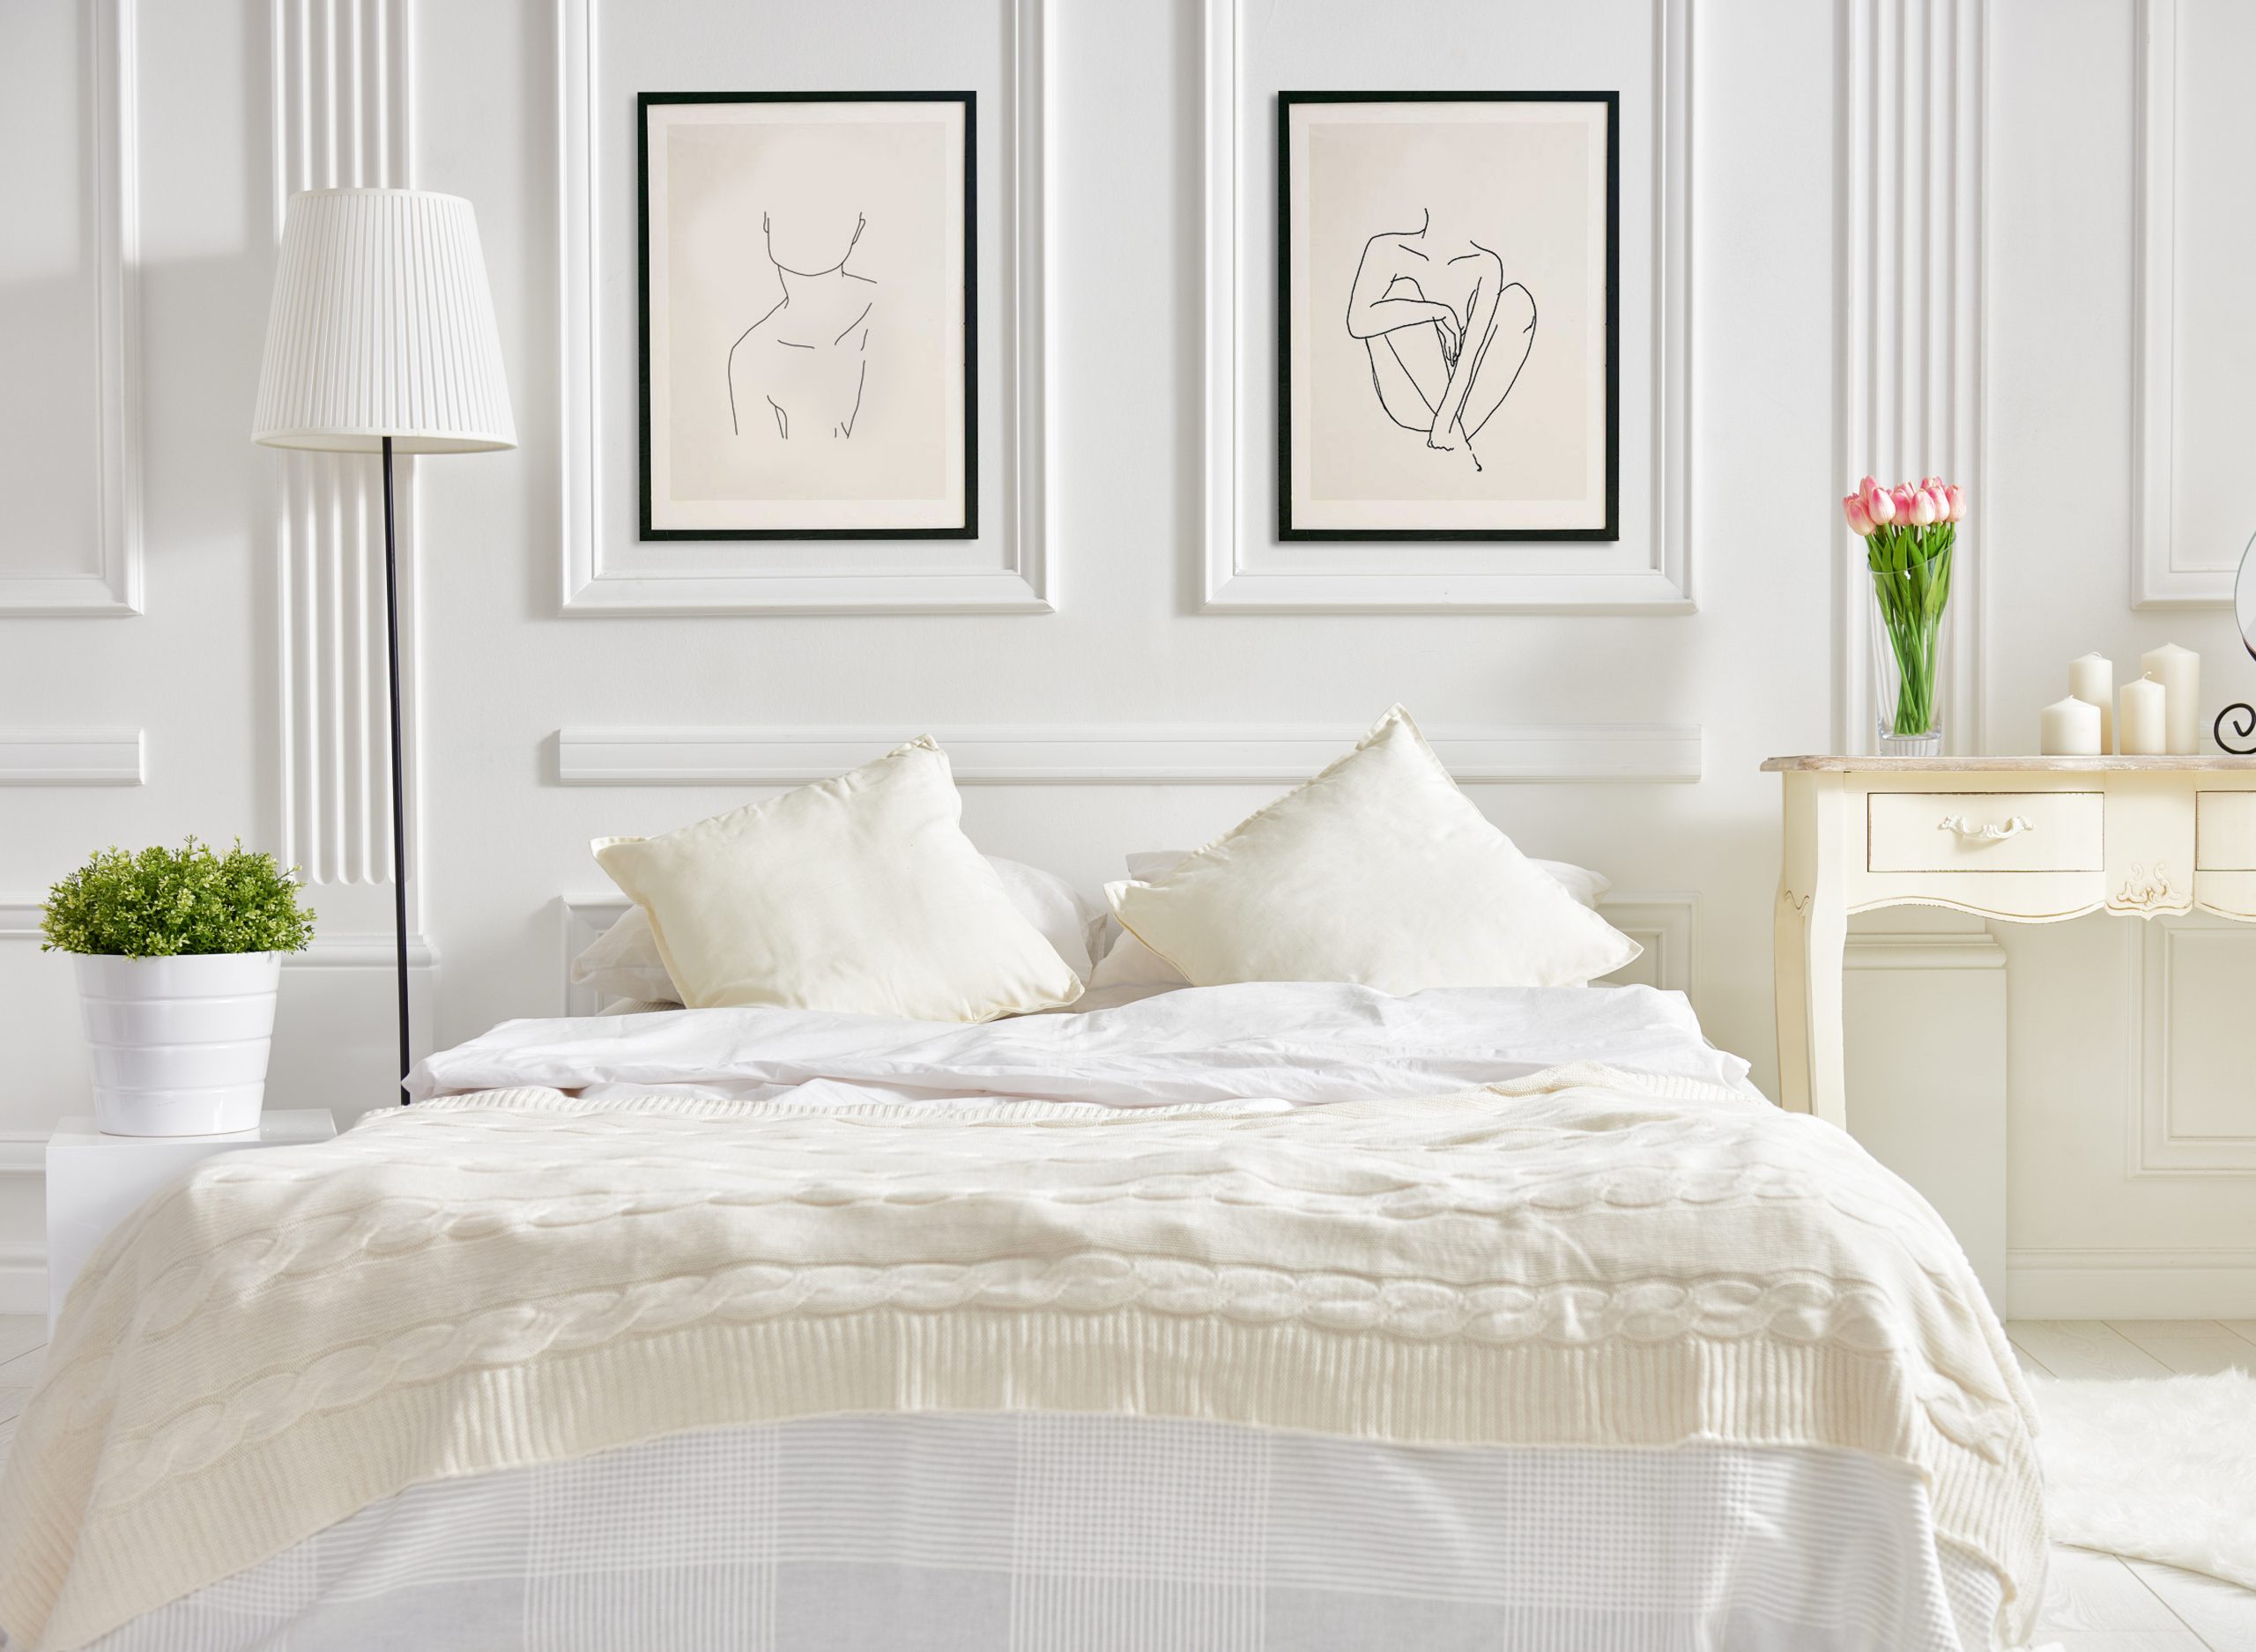 two fine art prints of figurative line drawings above a bed